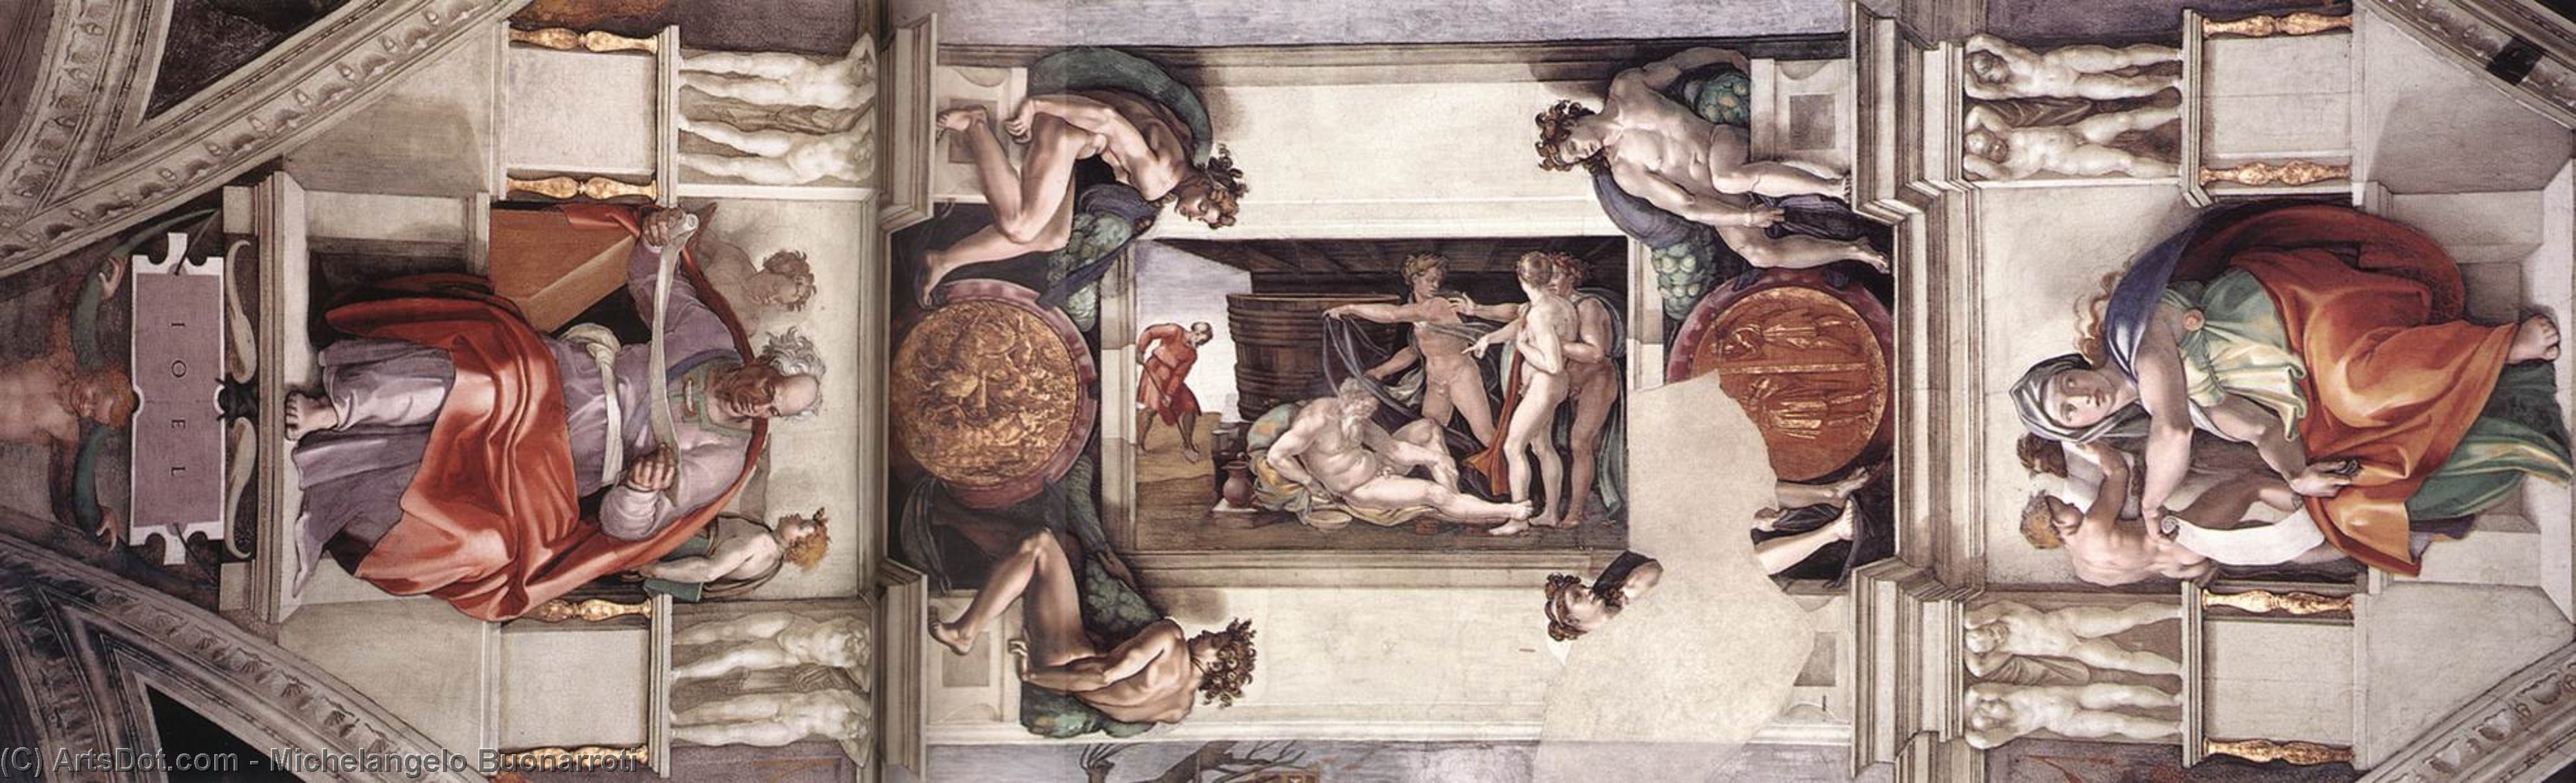 Wikioo.org - สารานุกรมวิจิตรศิลป์ - จิตรกรรม Michelangelo Buonarroti - The first bay of the ceiling